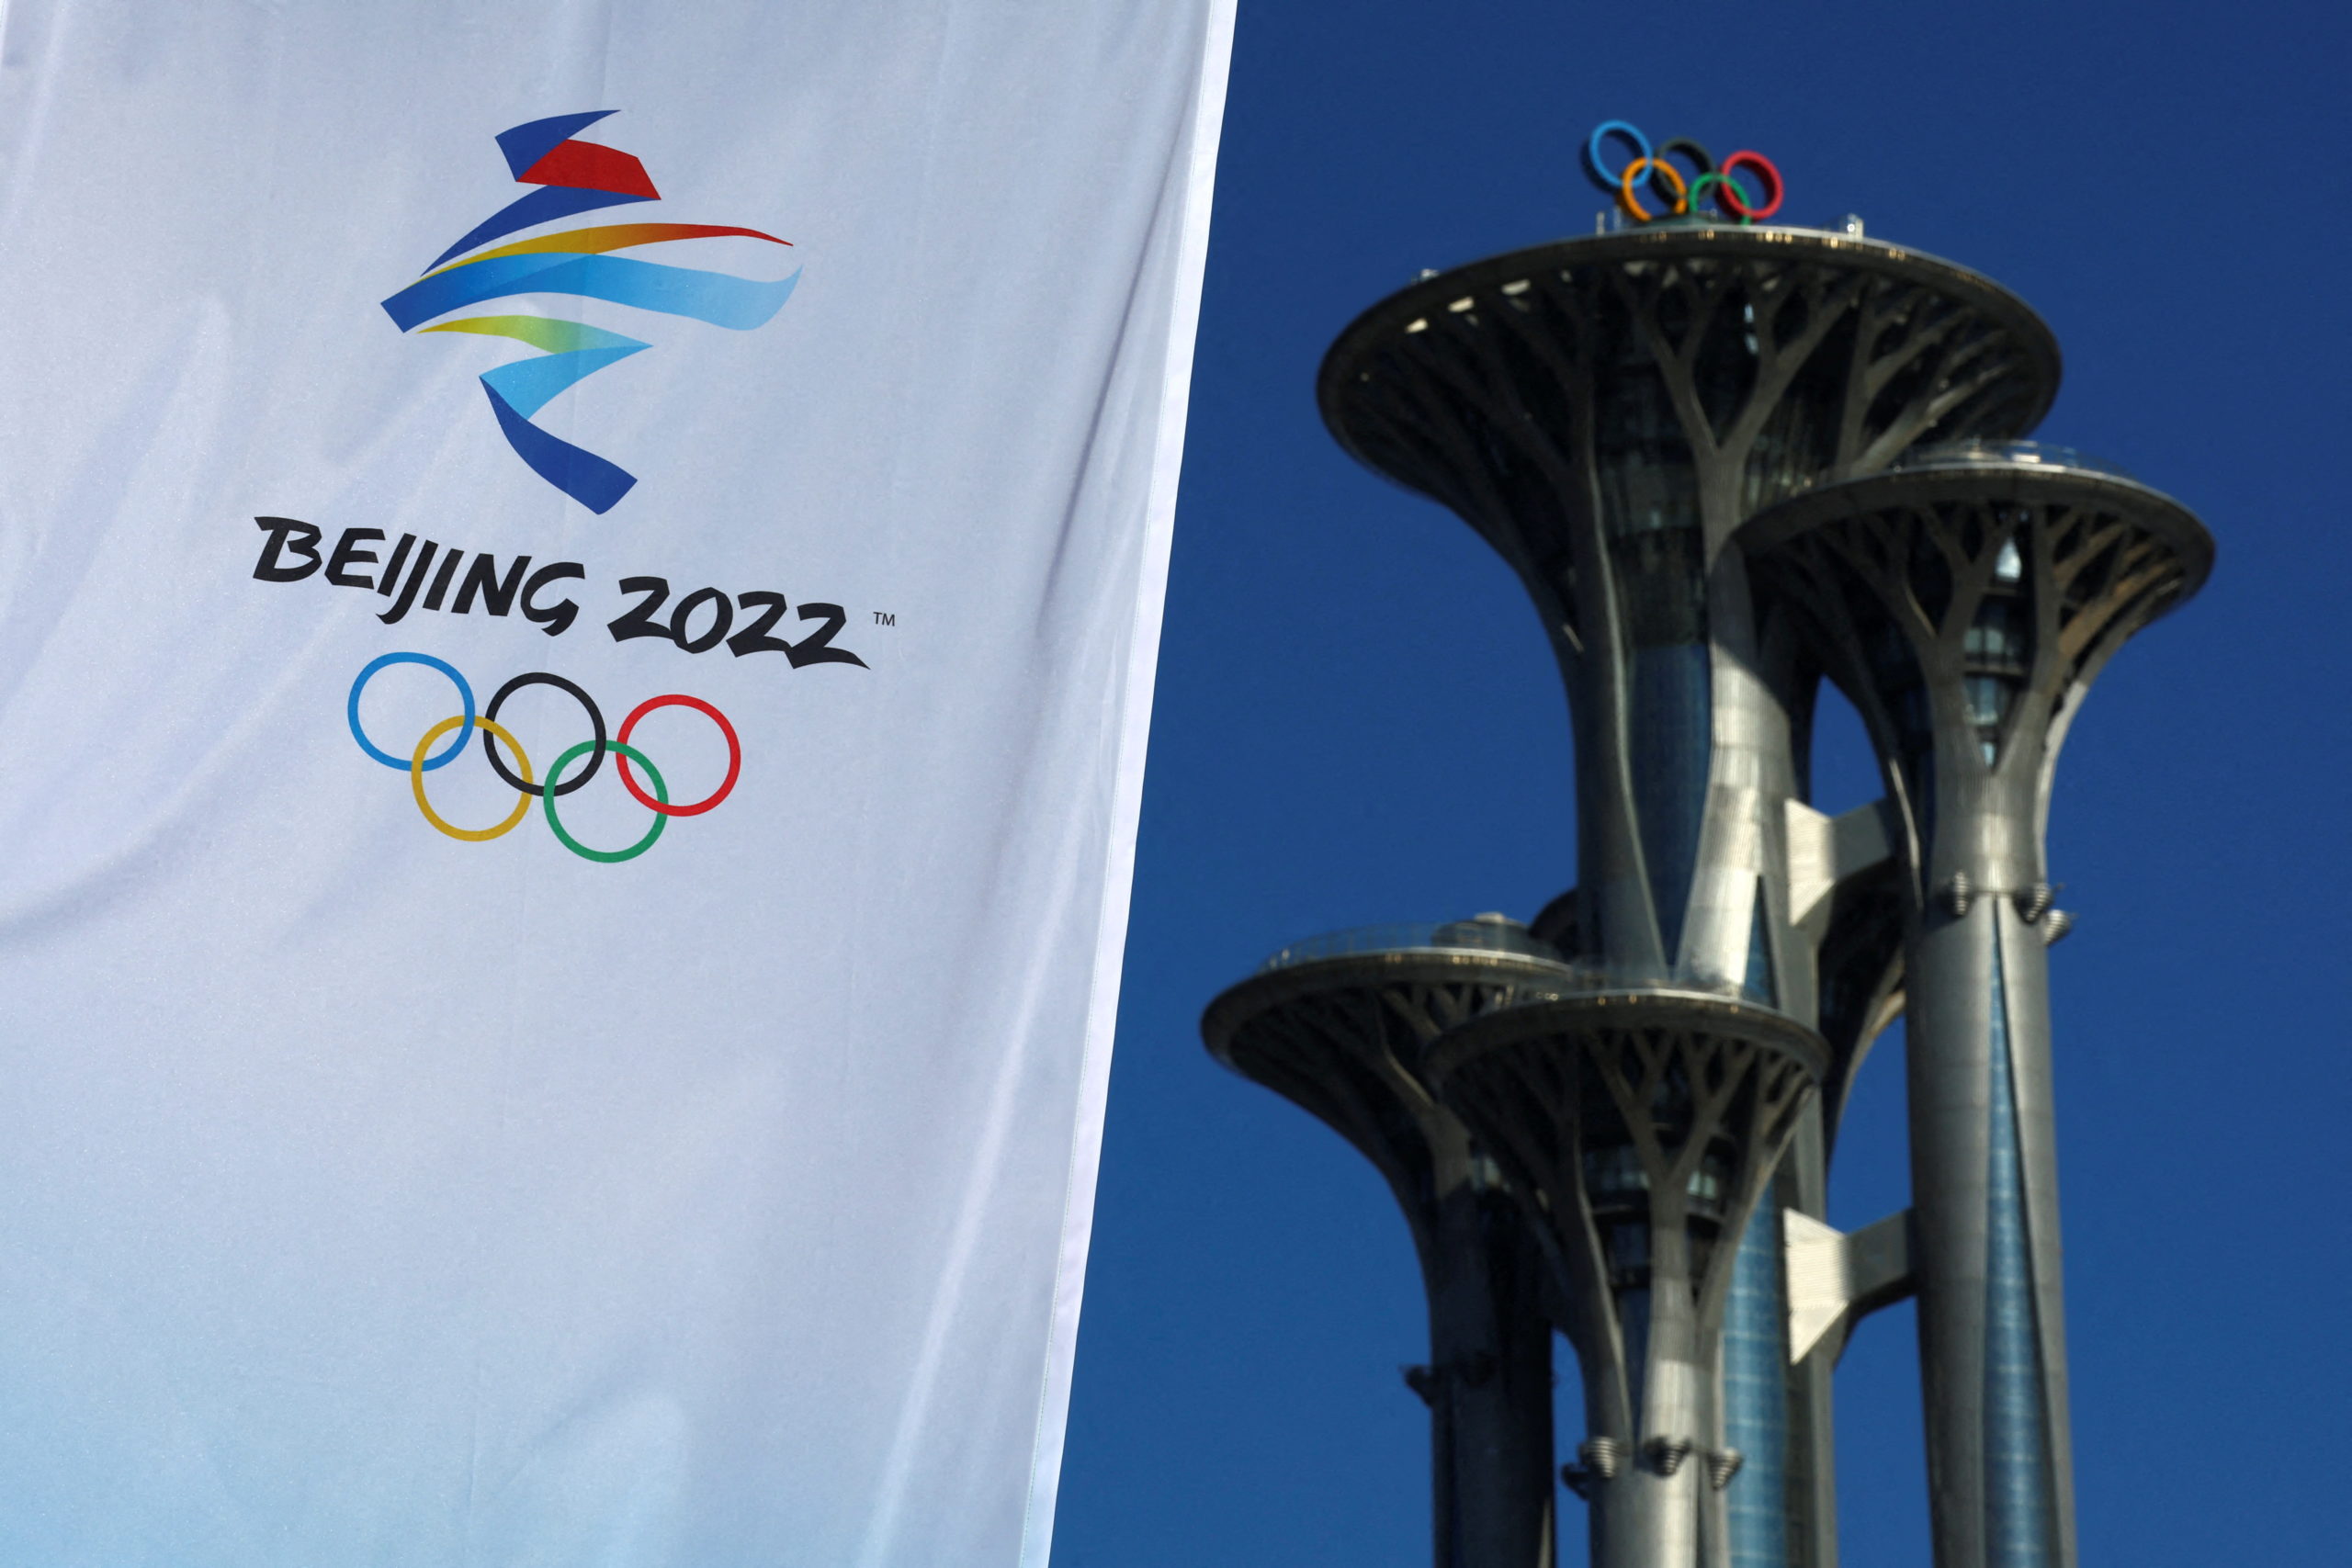 The Beijing Olympic Tower is pictured near the Main Press Centre ahead of the Beijing 2022 Winter Olympics in Beijing, China January 6, 2022. 